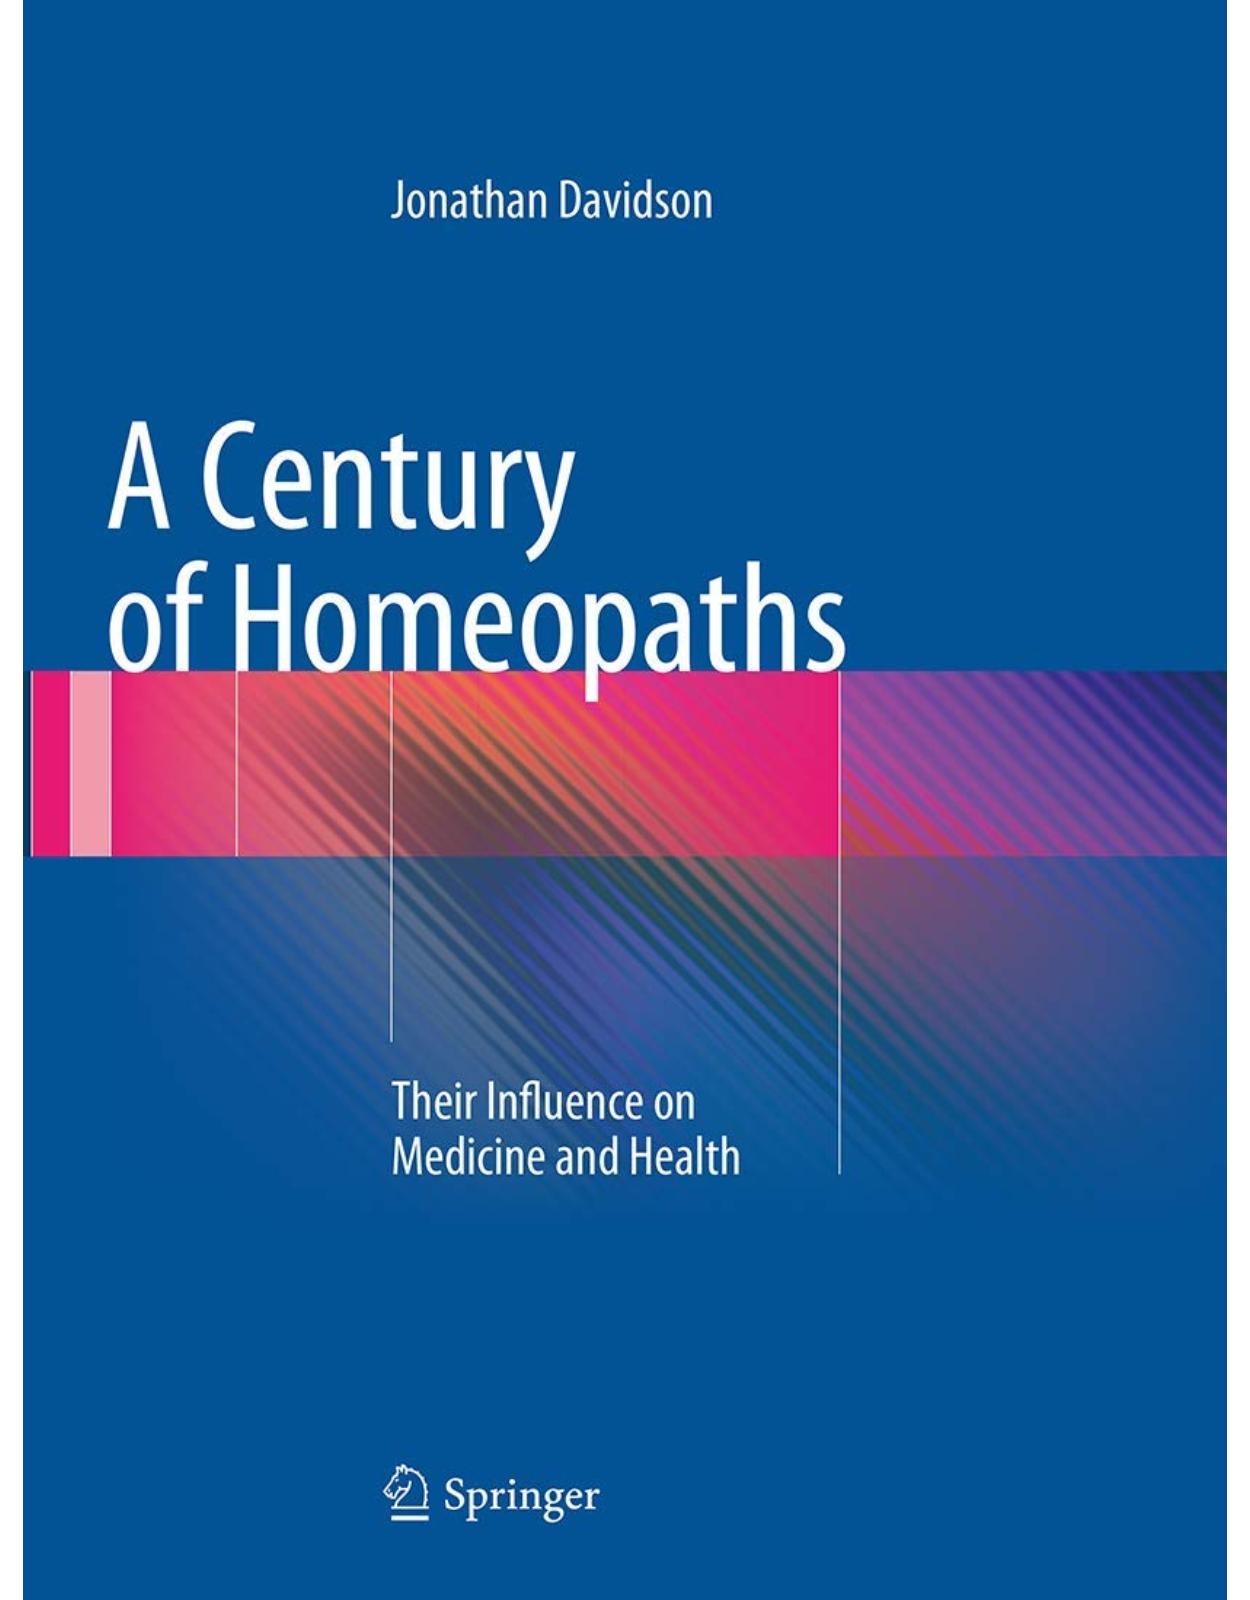 A Century of Homeopaths: Their Influence on Medicine and Health Paperback – 23 Aug. 2016